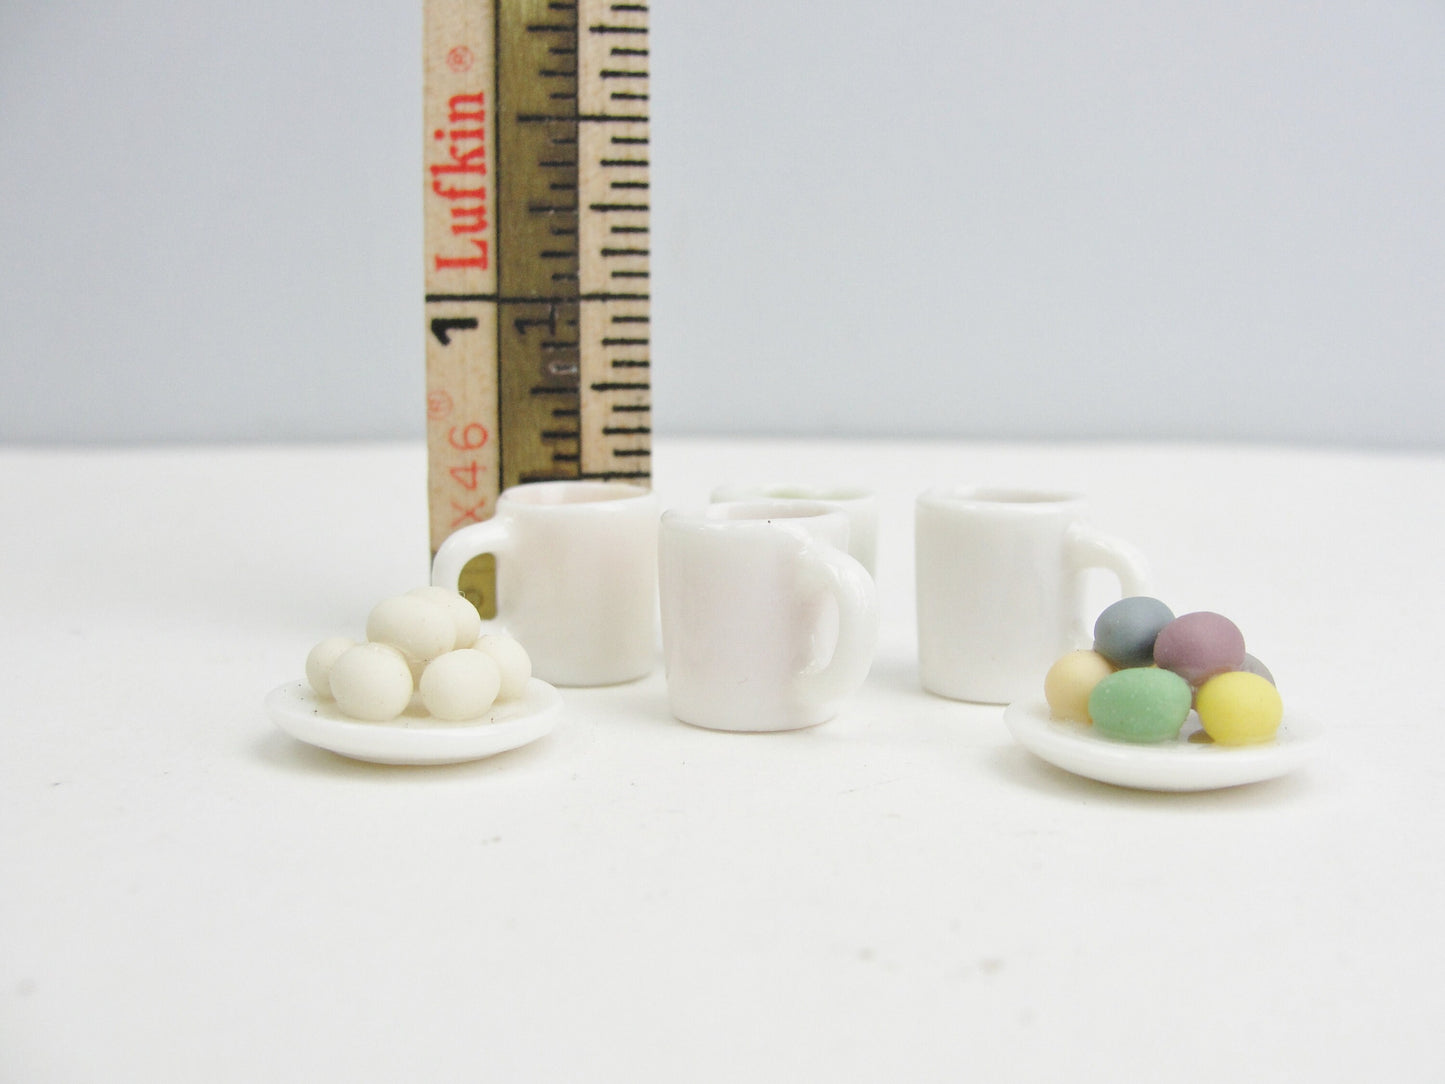 Easter miniatures choose colored eggs, chocolate bunnies, or an egg coloring set